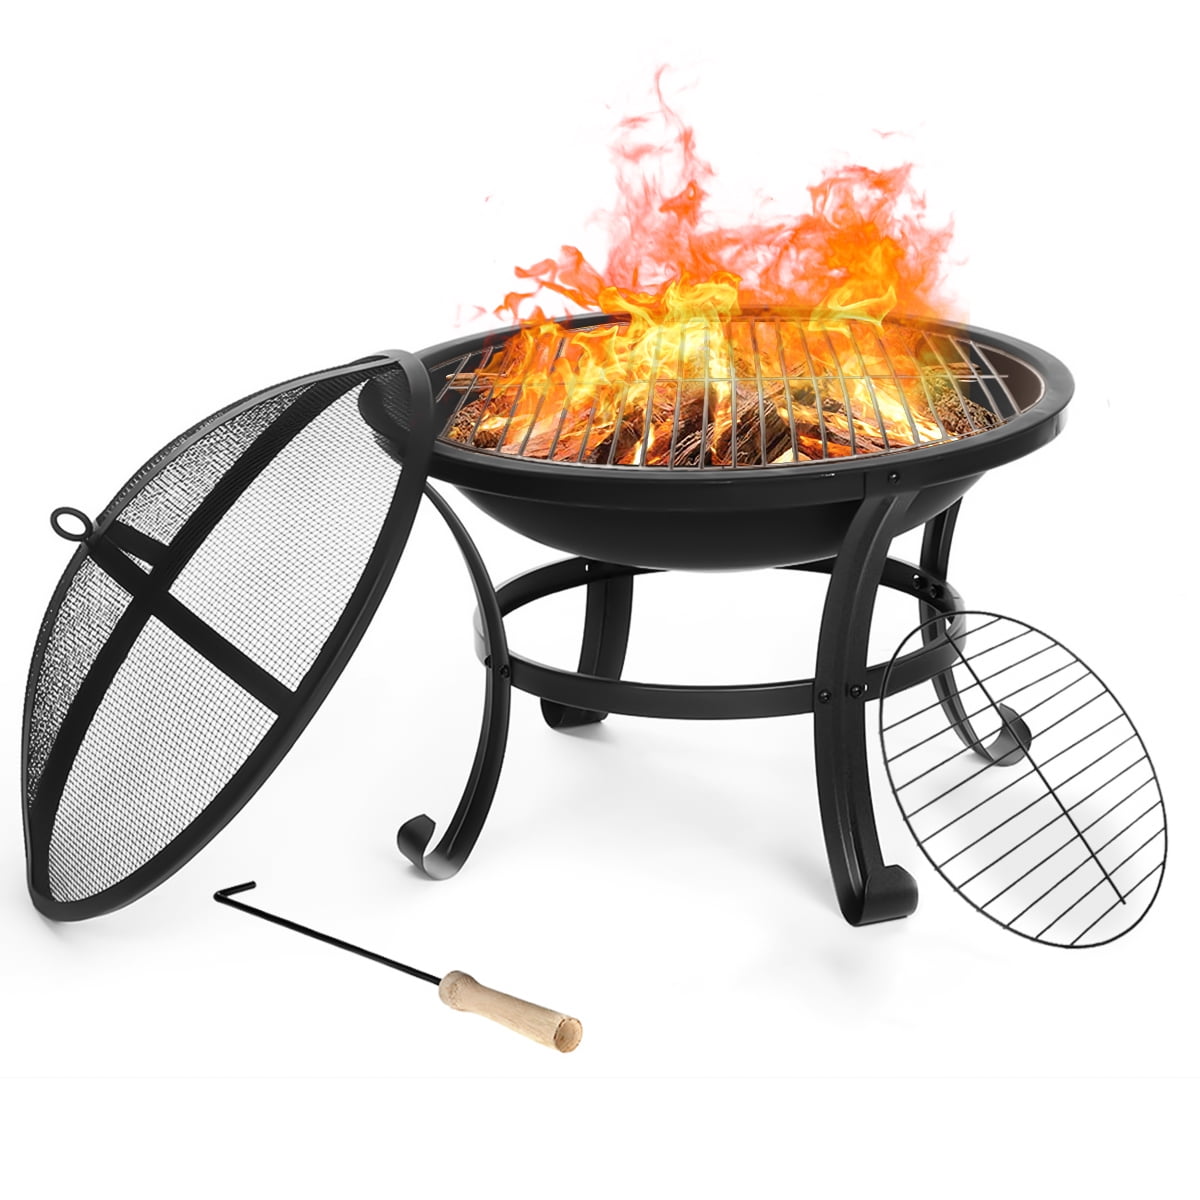 Black Fire Pit 22'' Outdoor Bowl Wood Burning with Protective Grille & Poker Multifunctional for Heating/BBQ Garden Patio Fire Pot,Portable Grill for Camping Beach Bonfire Picnic Garden 